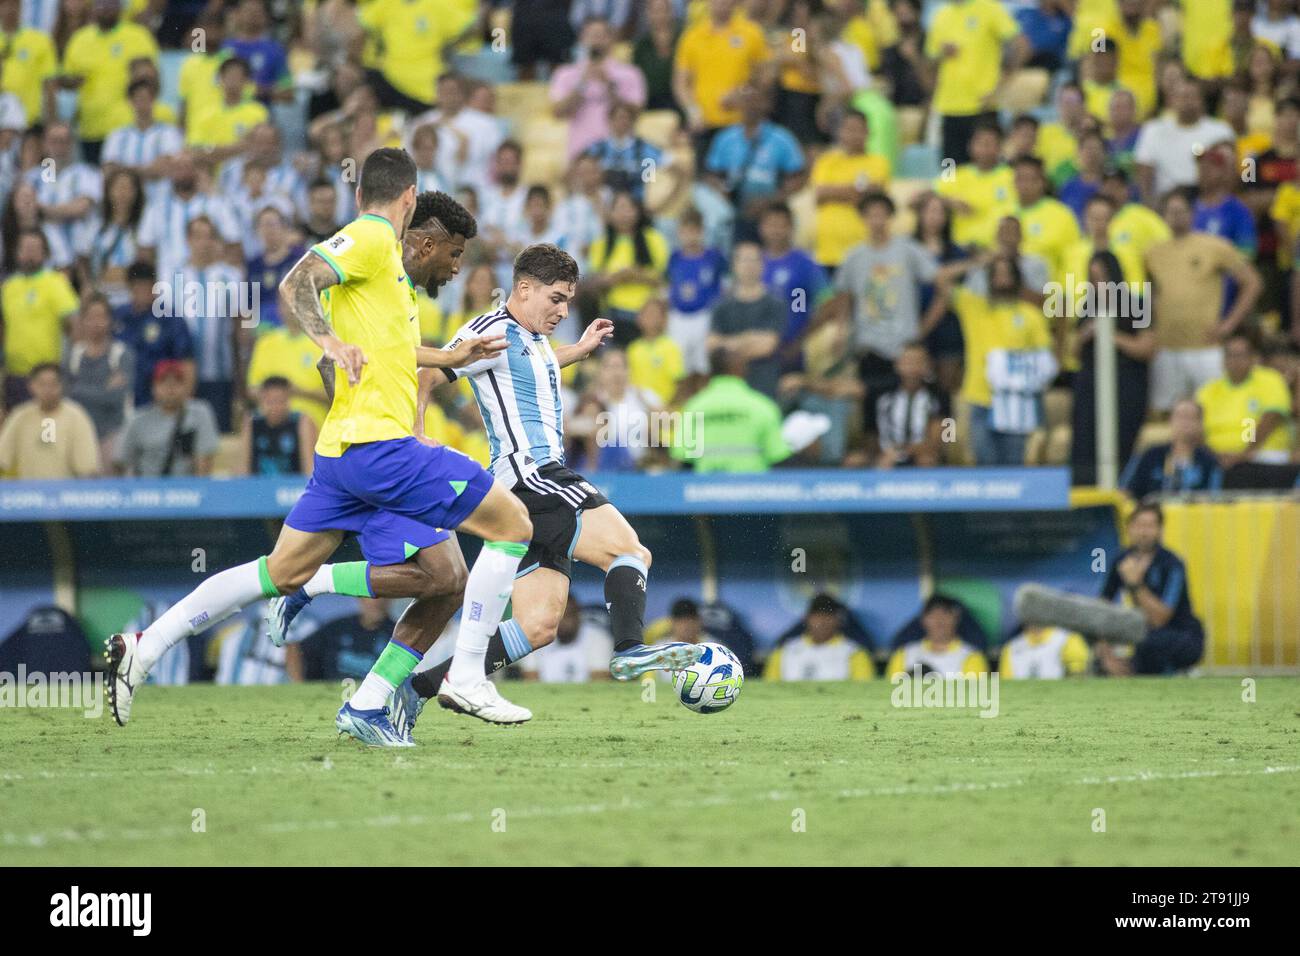 Rio De Janeiro, Brazil. 21st Nov, 2023. RIO DE JANEIRO, BRAZIL - NOVEMBER 21: Match between Brazil and Argentina as part of 2026 FIFA World Cup South American Qualification at Maracana Stadium on November 21, 2023 in Rio de Janeiro, Brazil. (Photo by Wanderson Oliveira/PxImages) Credit: Px Images/Alamy Live News Stock Photo